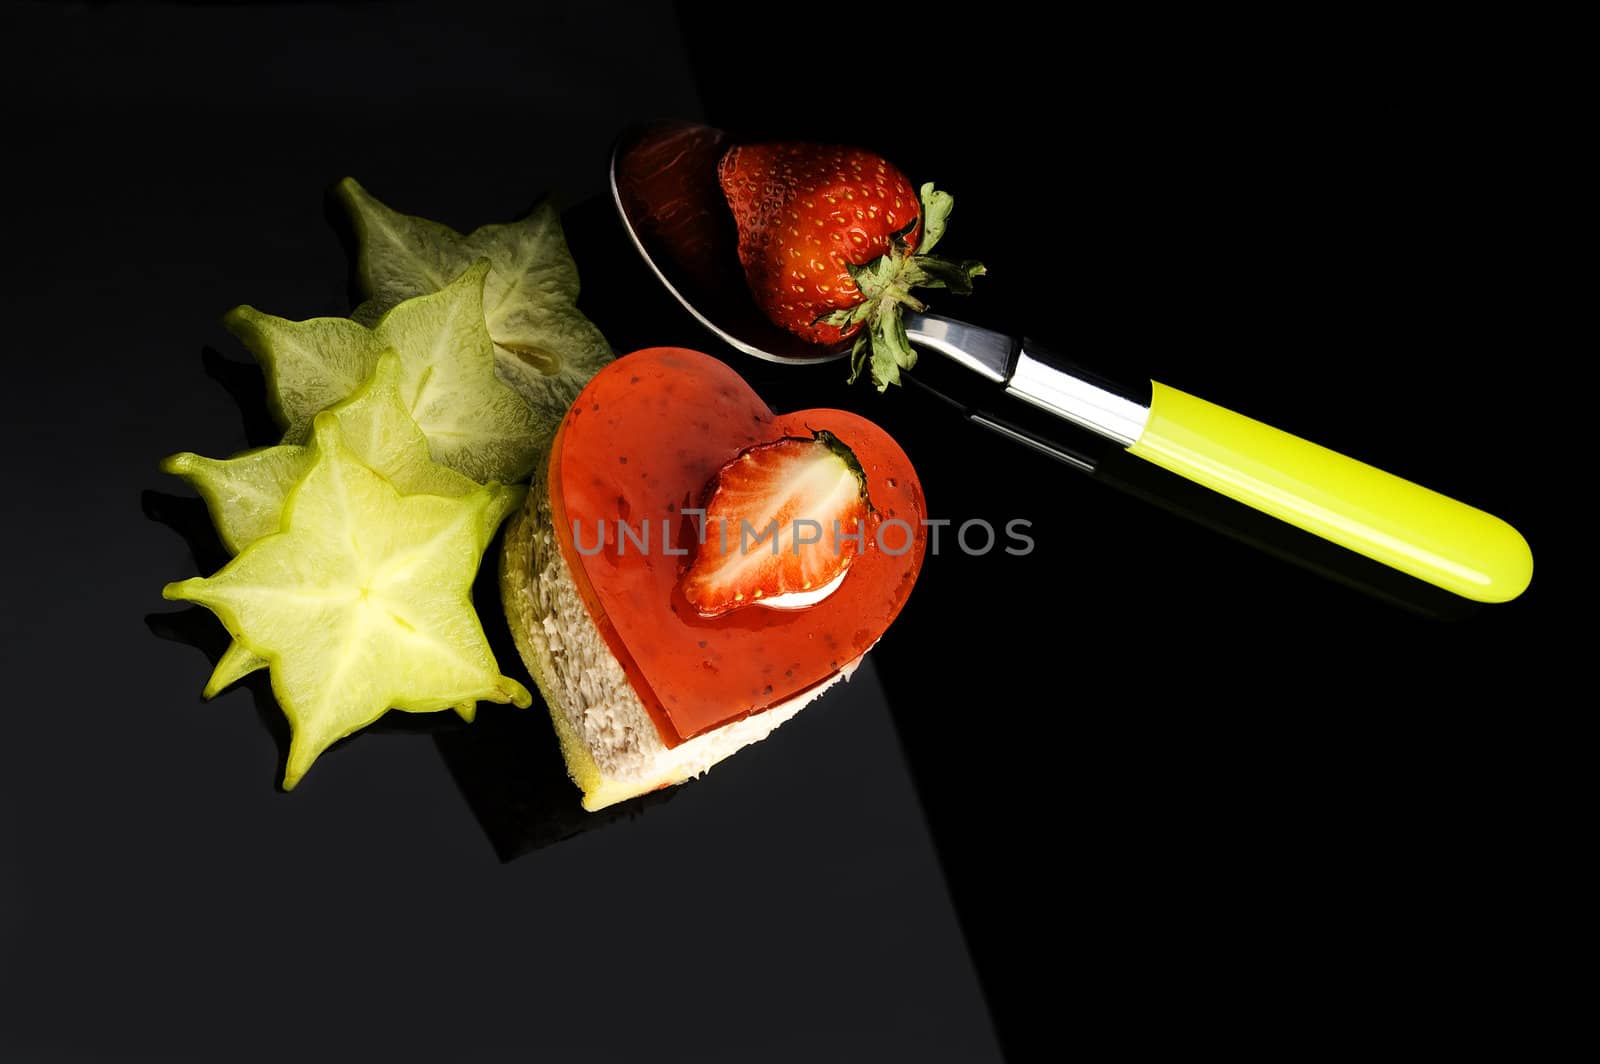 heart shaped strawberry cake with carambola or star fruit decoration over black background